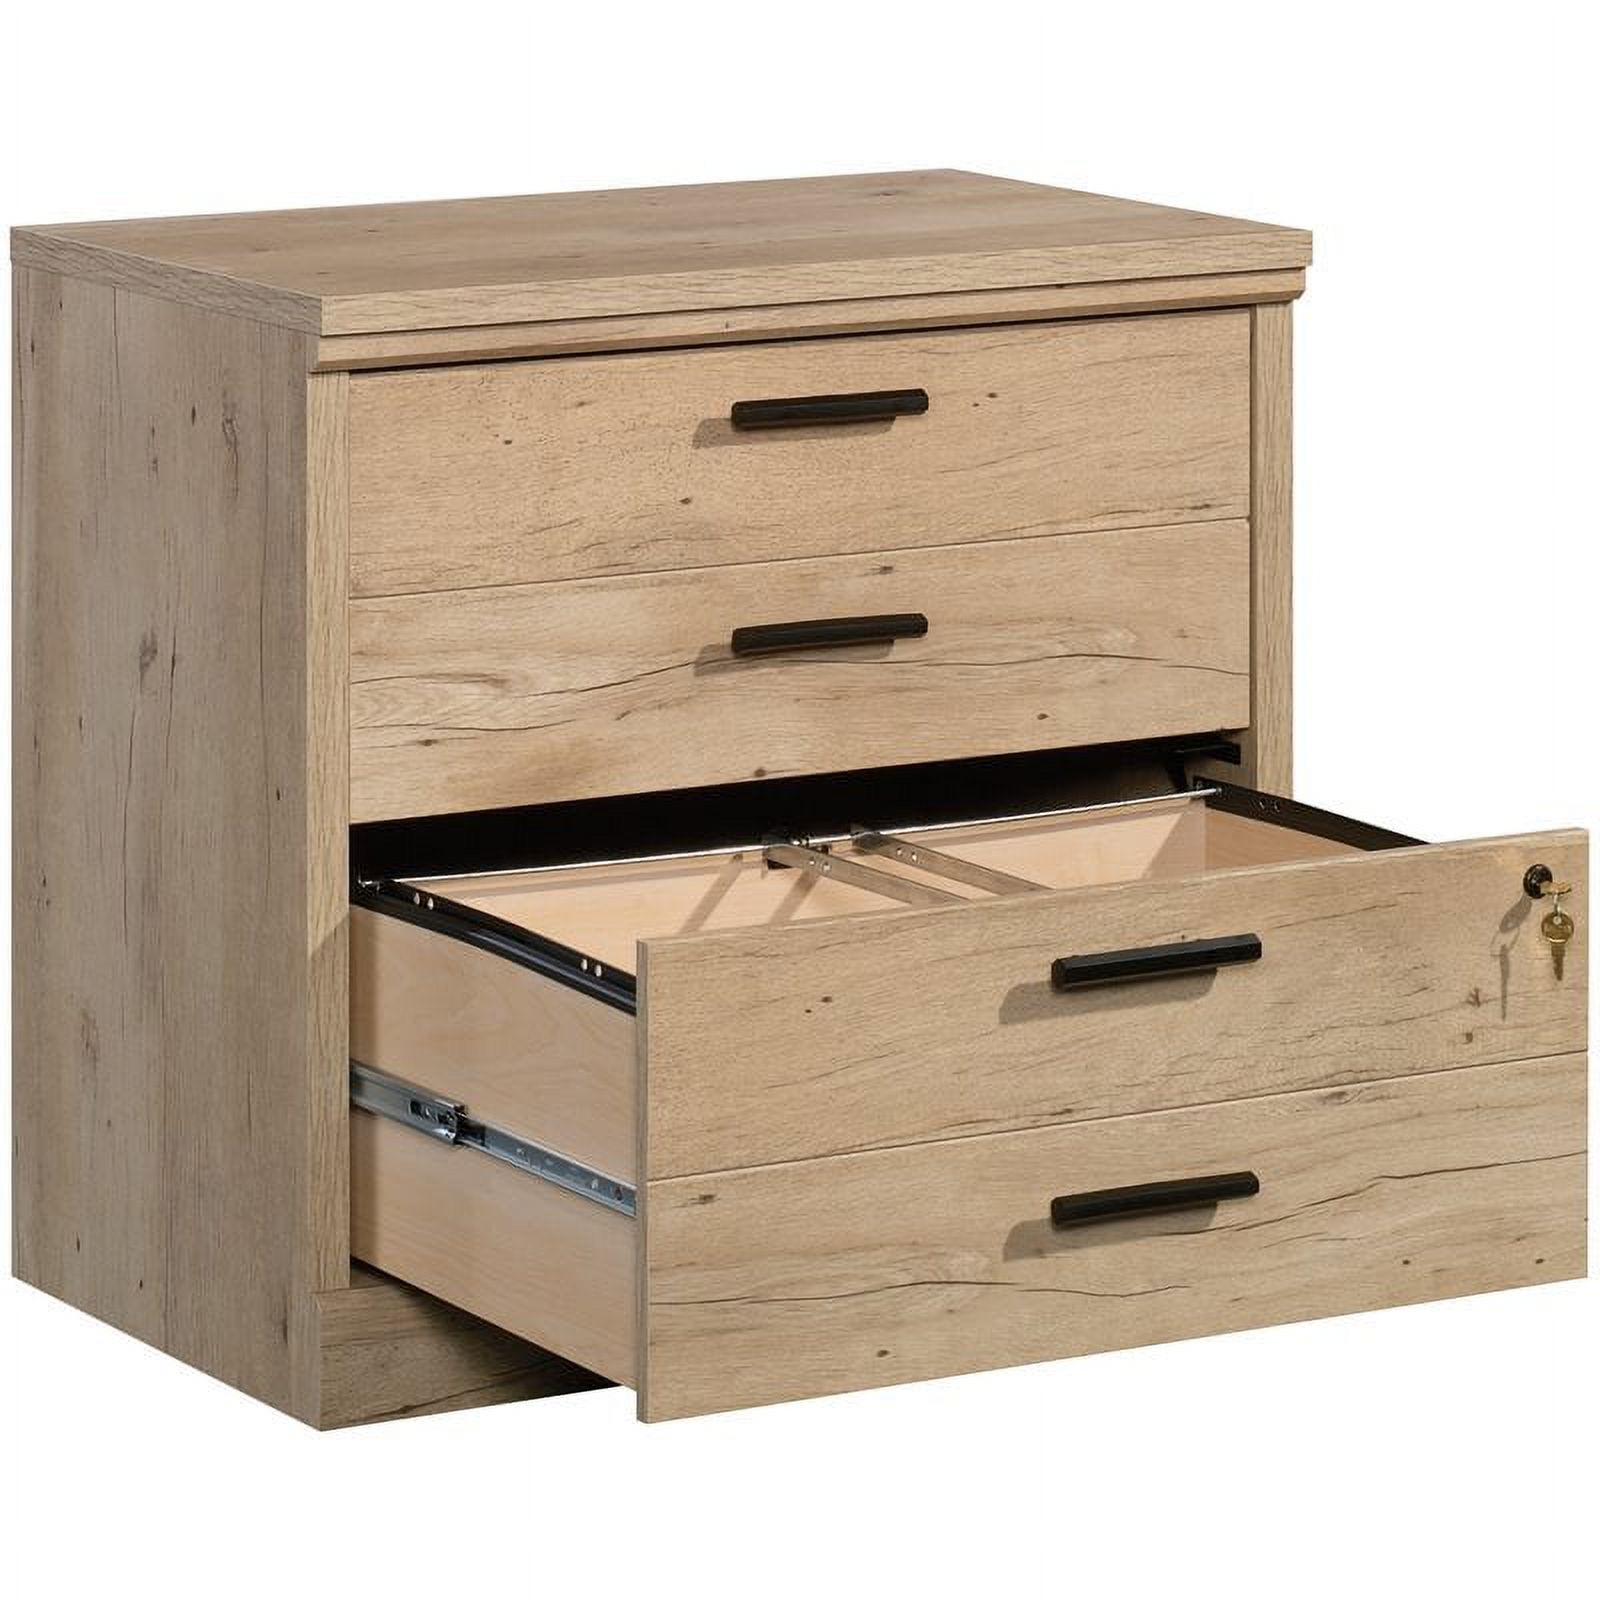 UrbanPro 2-Drawer Modern Engineered Wood Lateral File Cabinet in Prime Oak - image 3 of 10